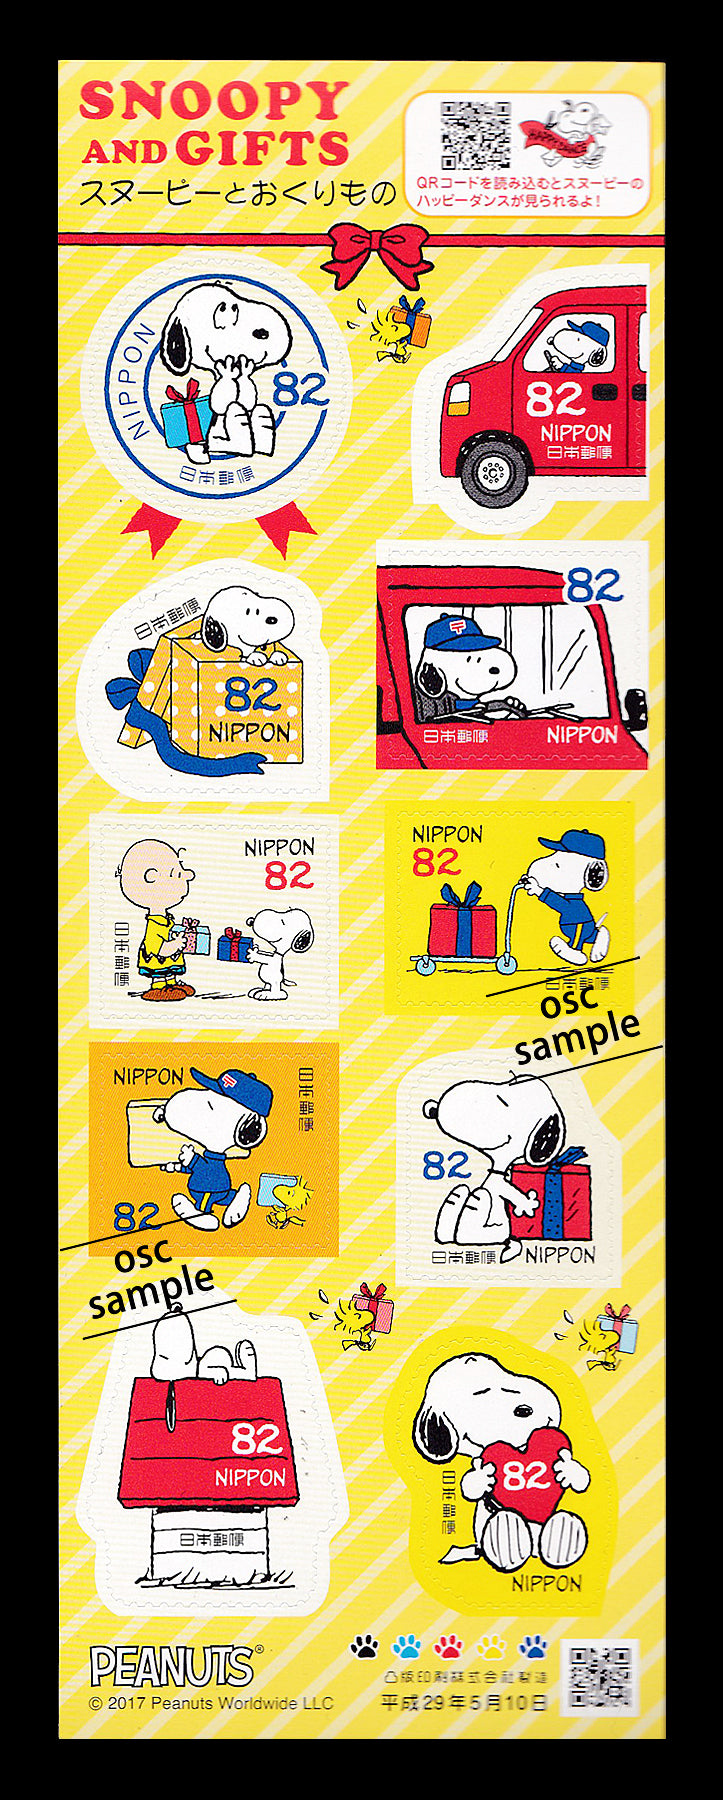 Snoopy and the Gifts